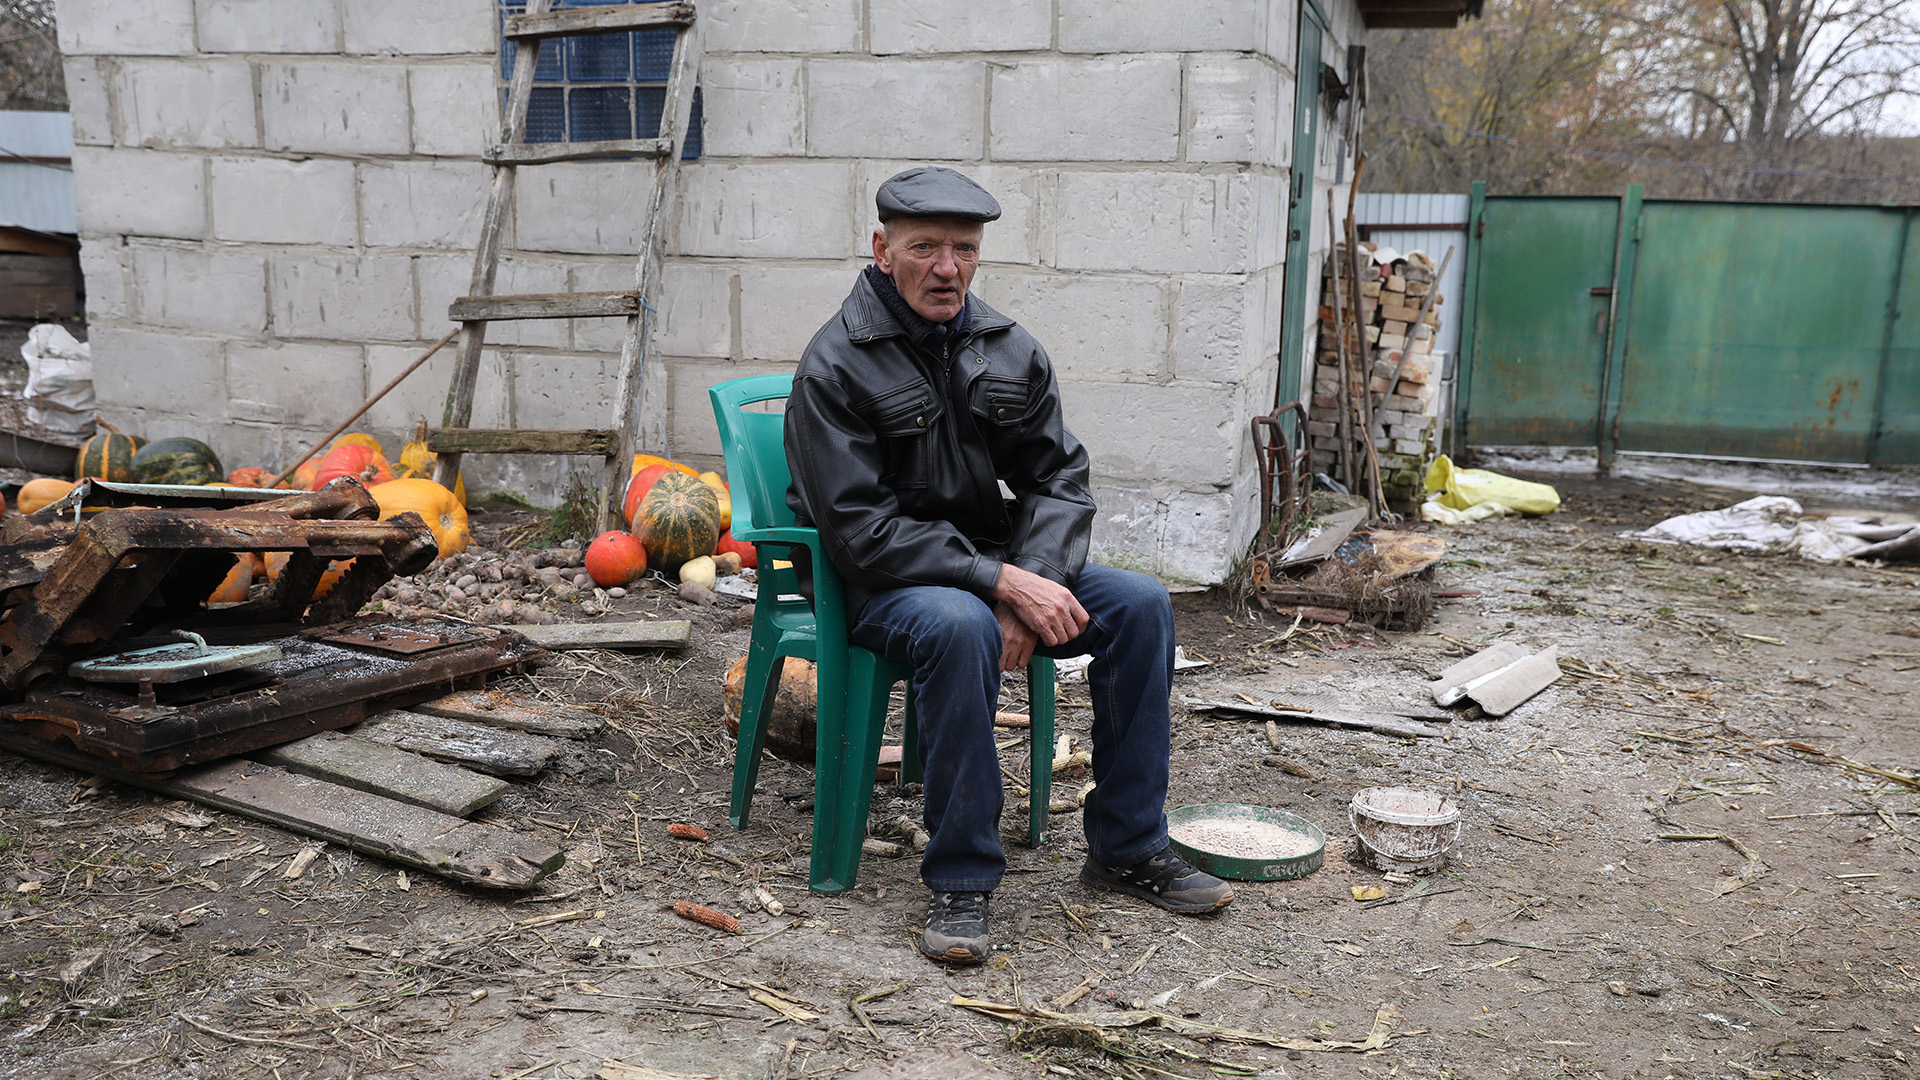 Hryhoriy Dzyuba, a farmer and resident of the flooded Demydiv village outside his barn. Demydiv... [Photo of the day - February 2023]